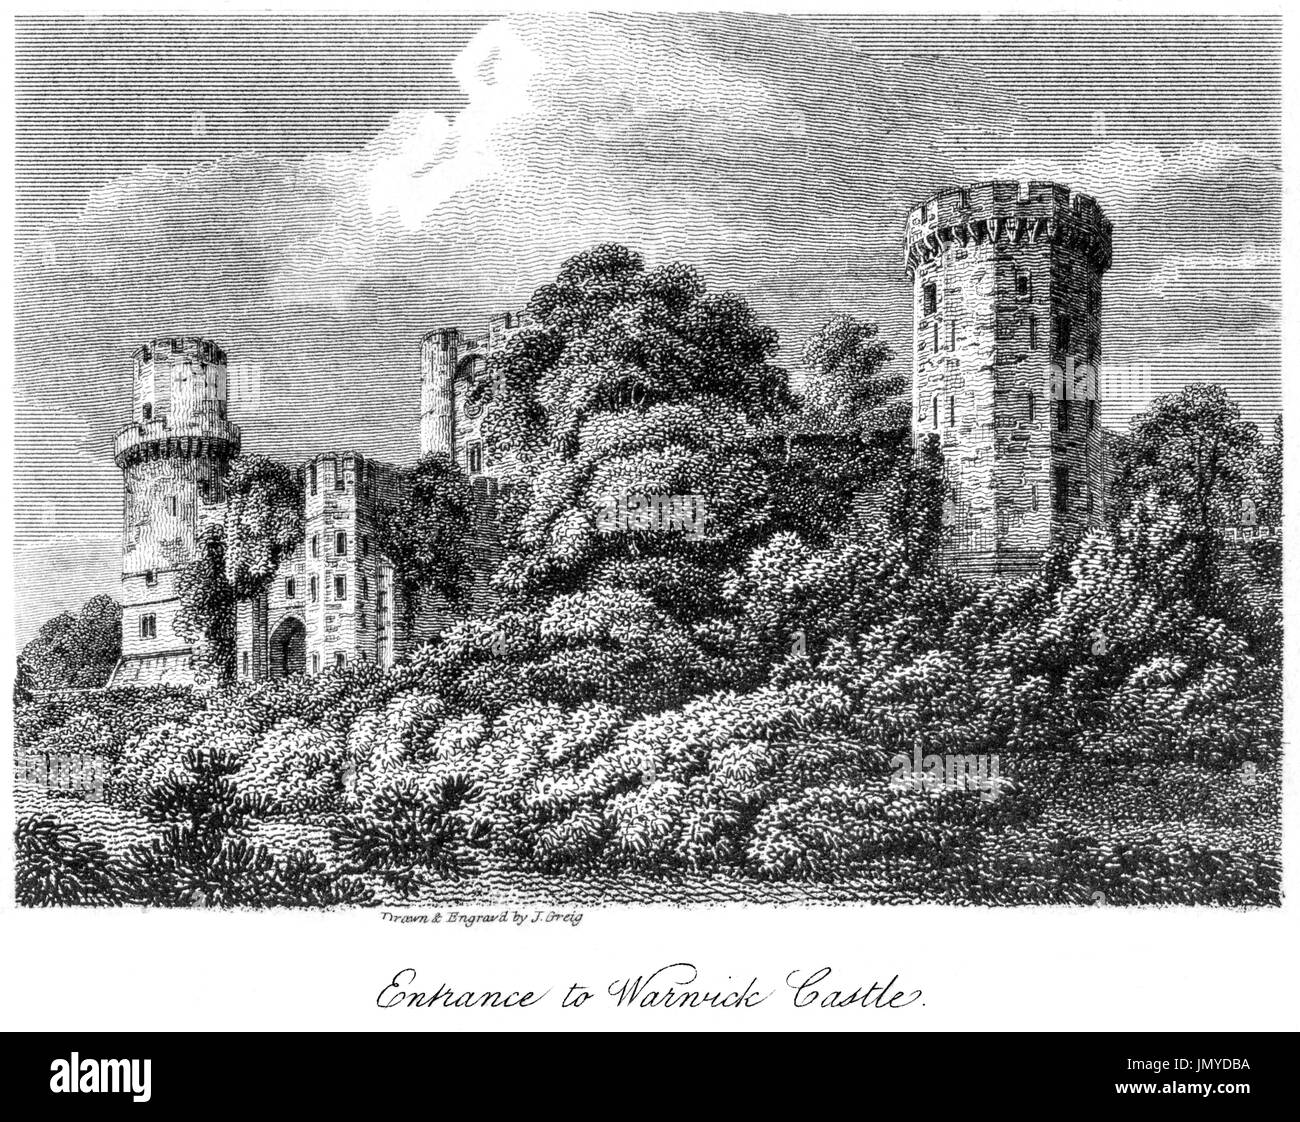 An engraving of the Entrance to Warwick Castle scanned at high resolution from a book printed in 1808.  Believed copyright free. Stock Photo